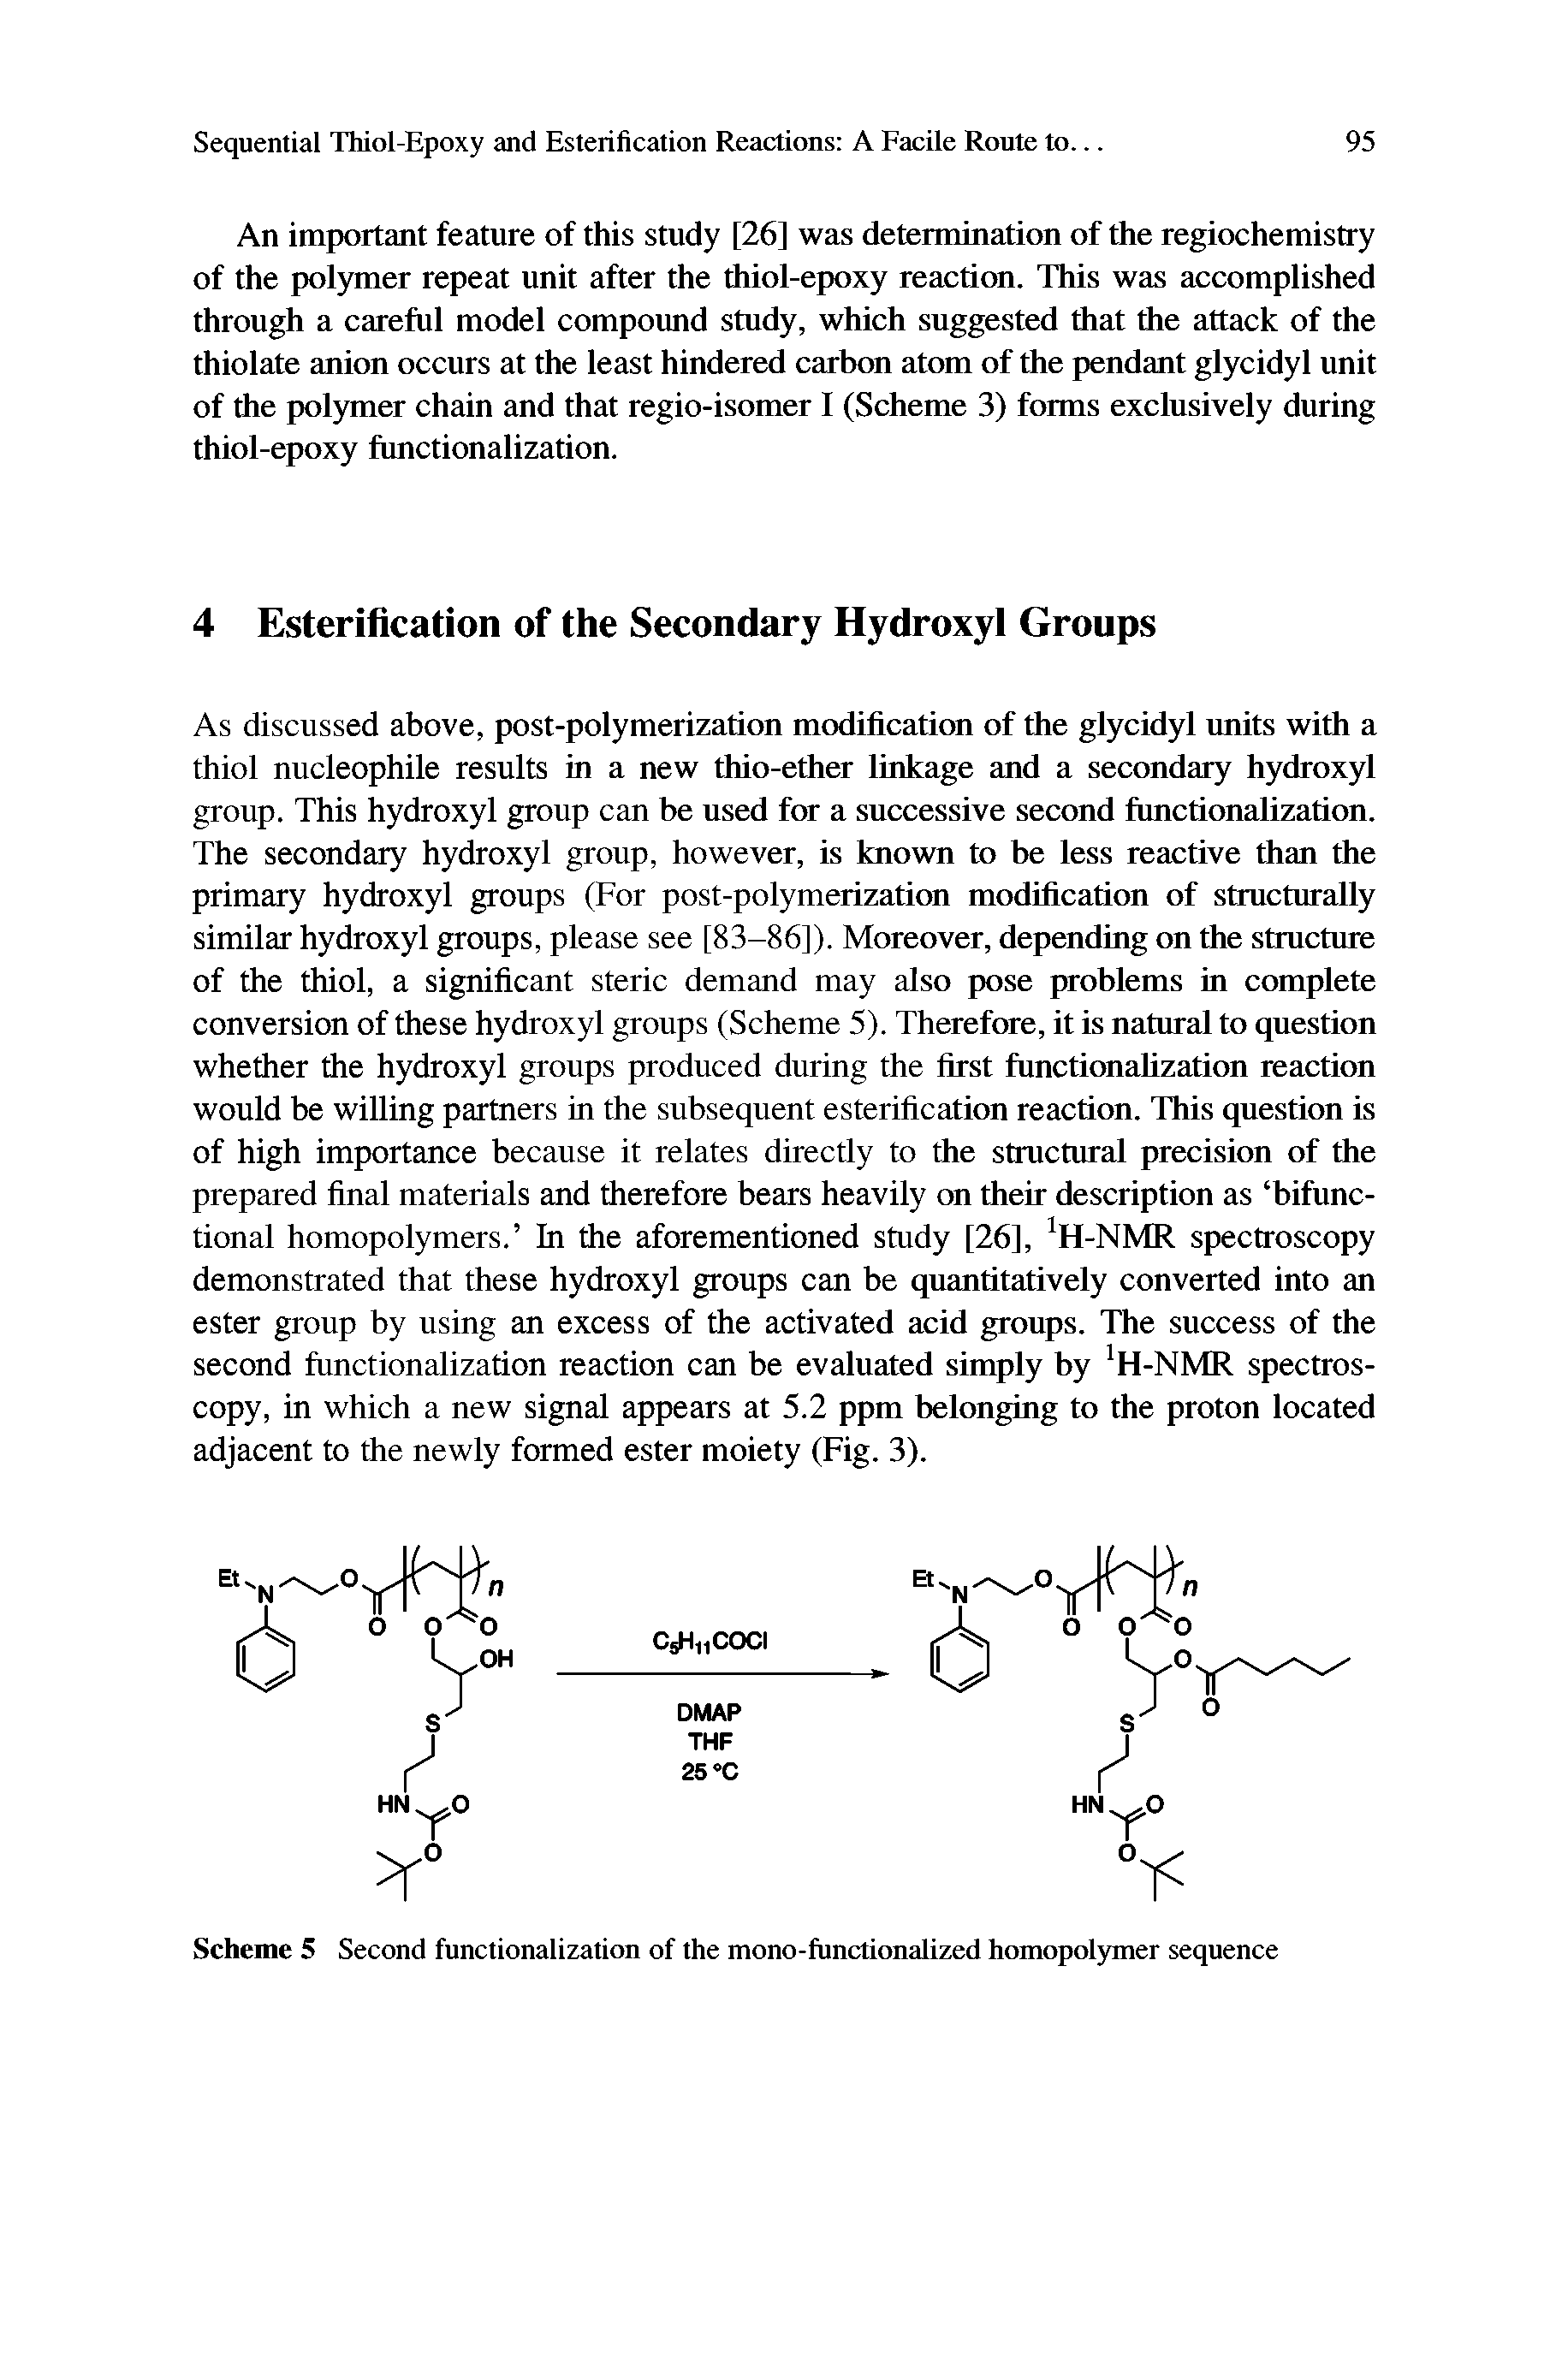 Scheme 5 Second functionalization of the mono-functionalized homopolymer sequence...